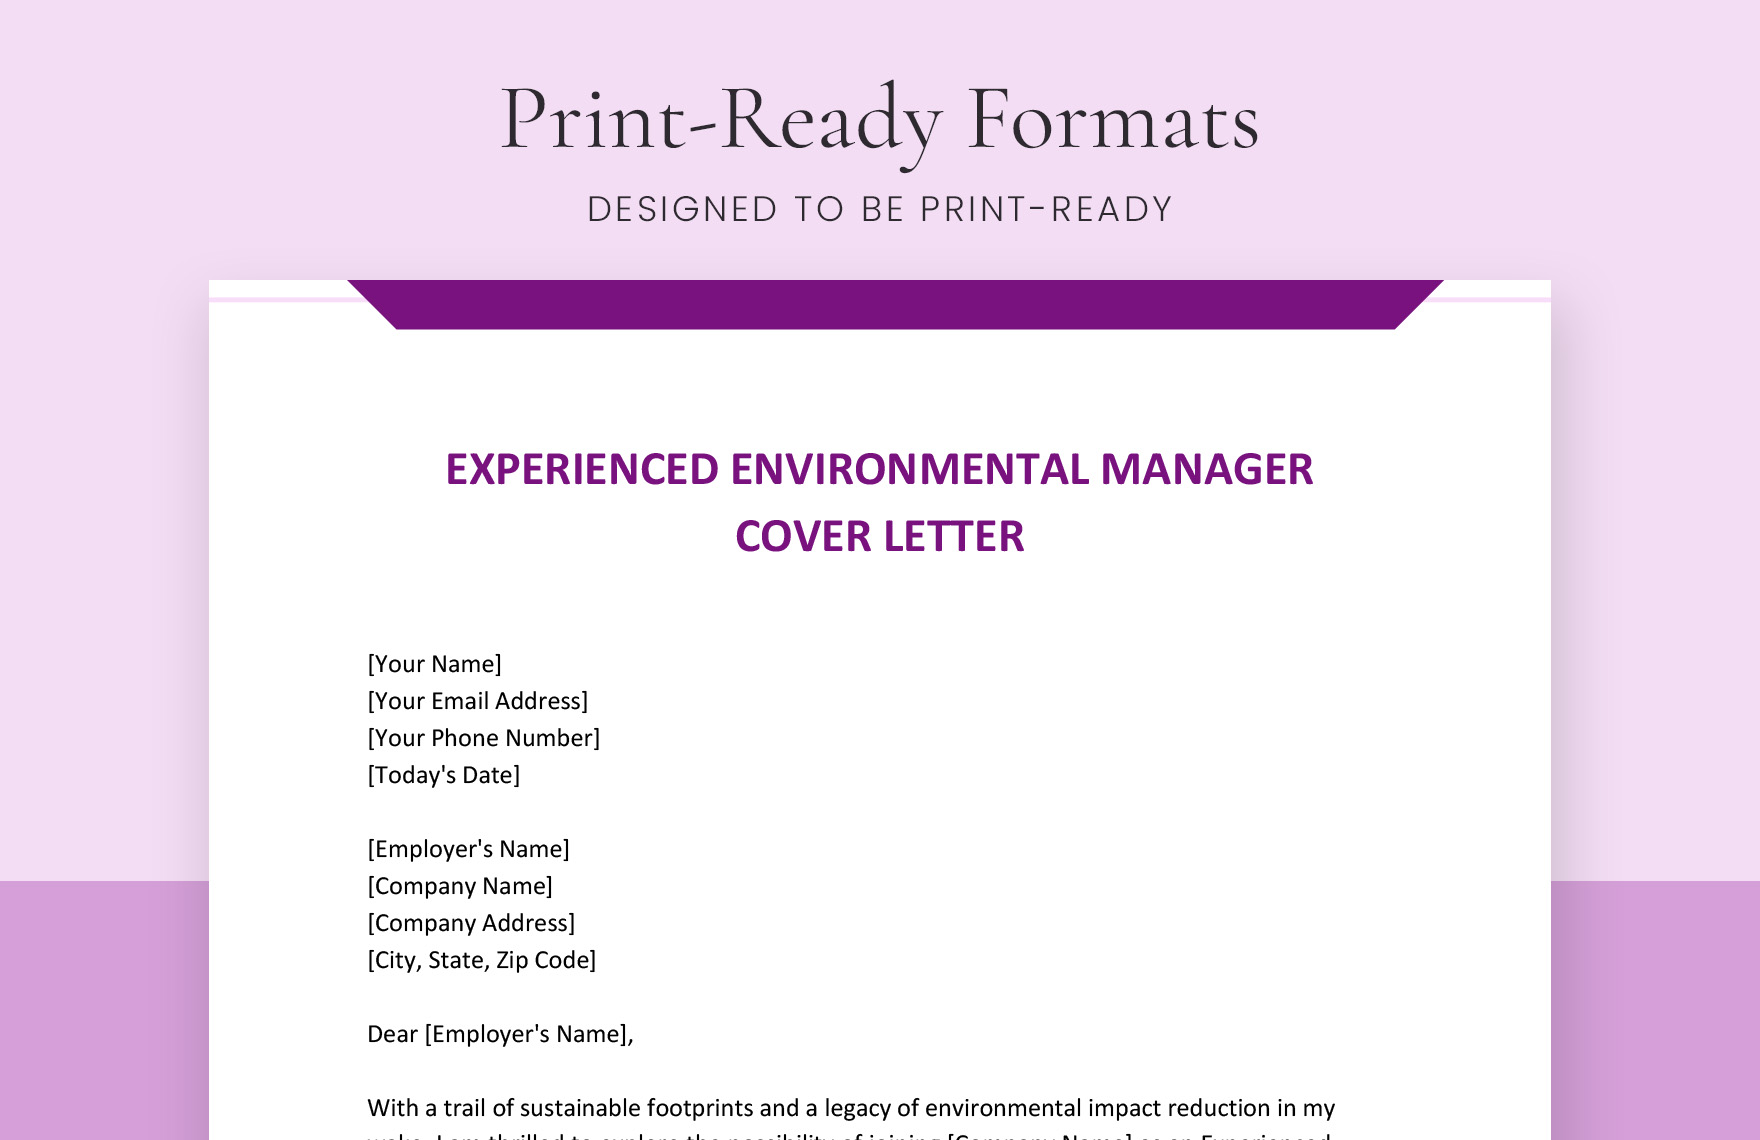 Experienced Environmental Manager Cover Letter